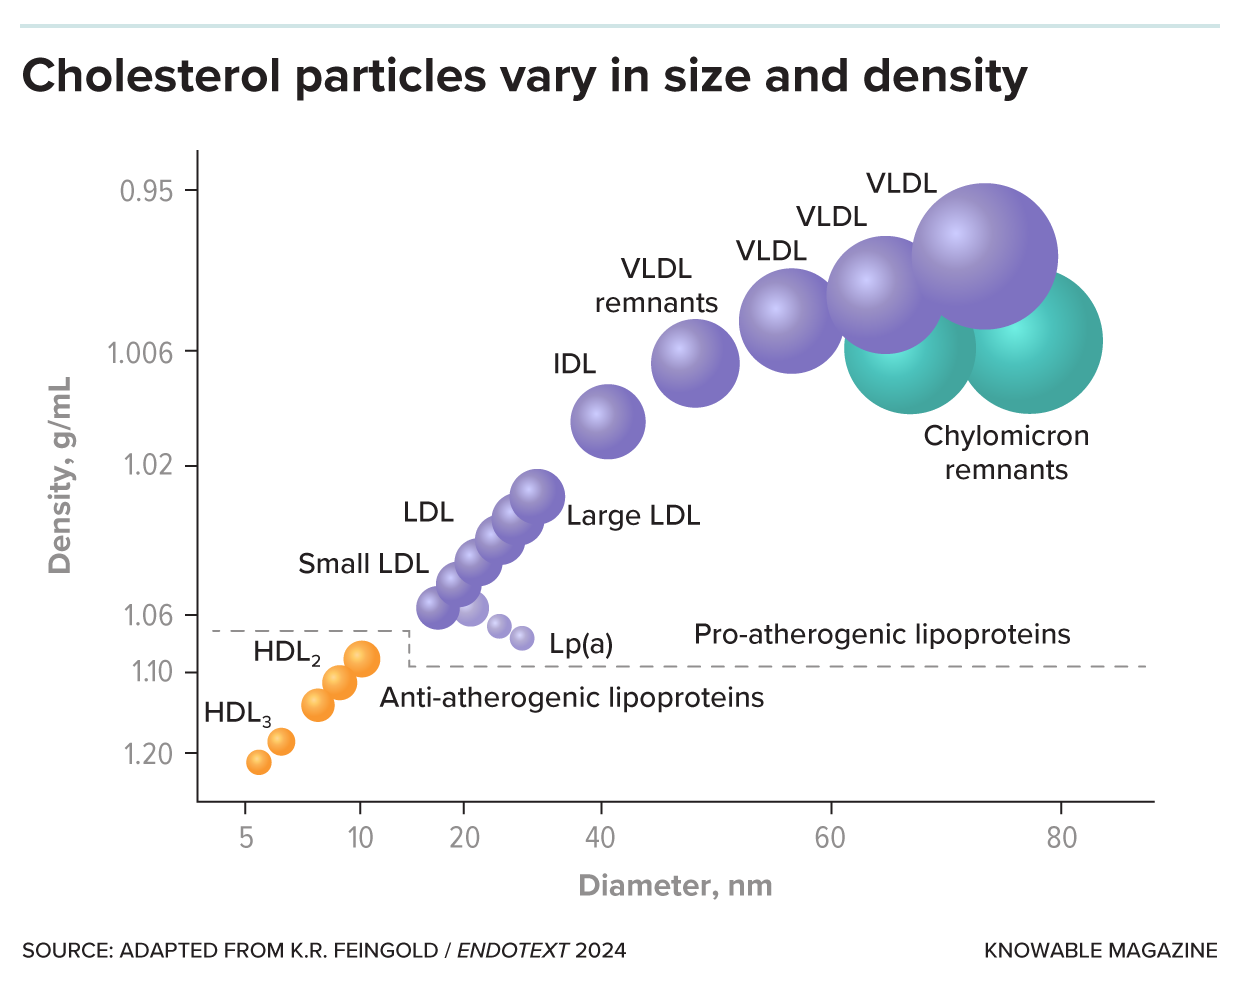 A line graph illustrates particles of different sizes and densities, with the larger particles being less dense.